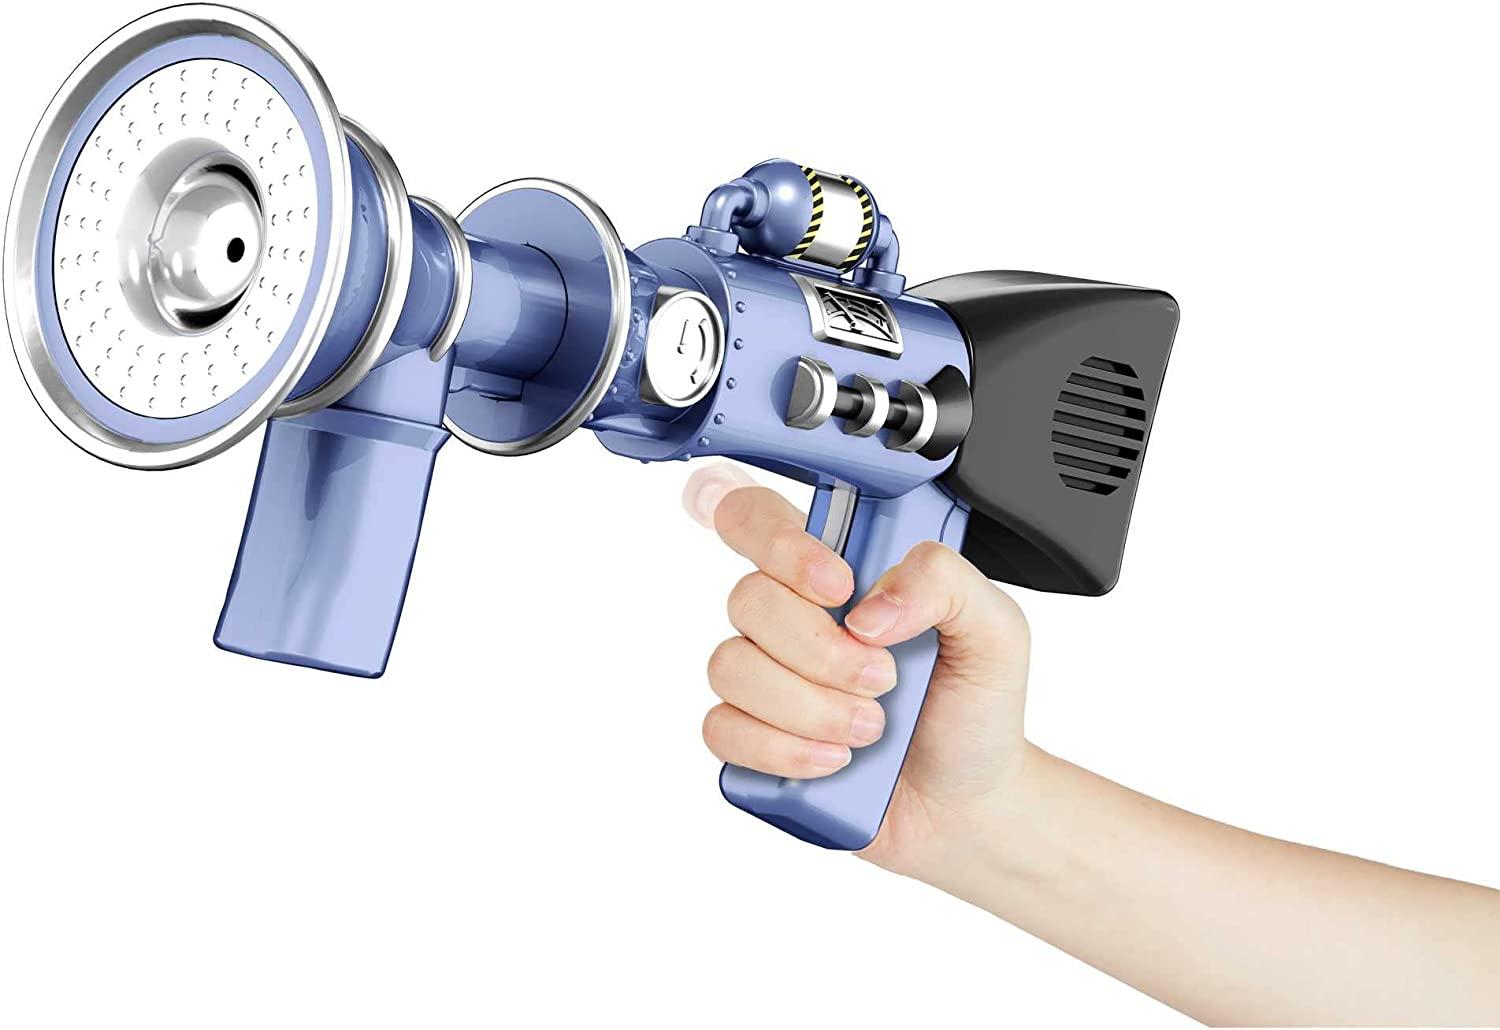 Minions Fart n Fire Super Size Blaster for $19.99